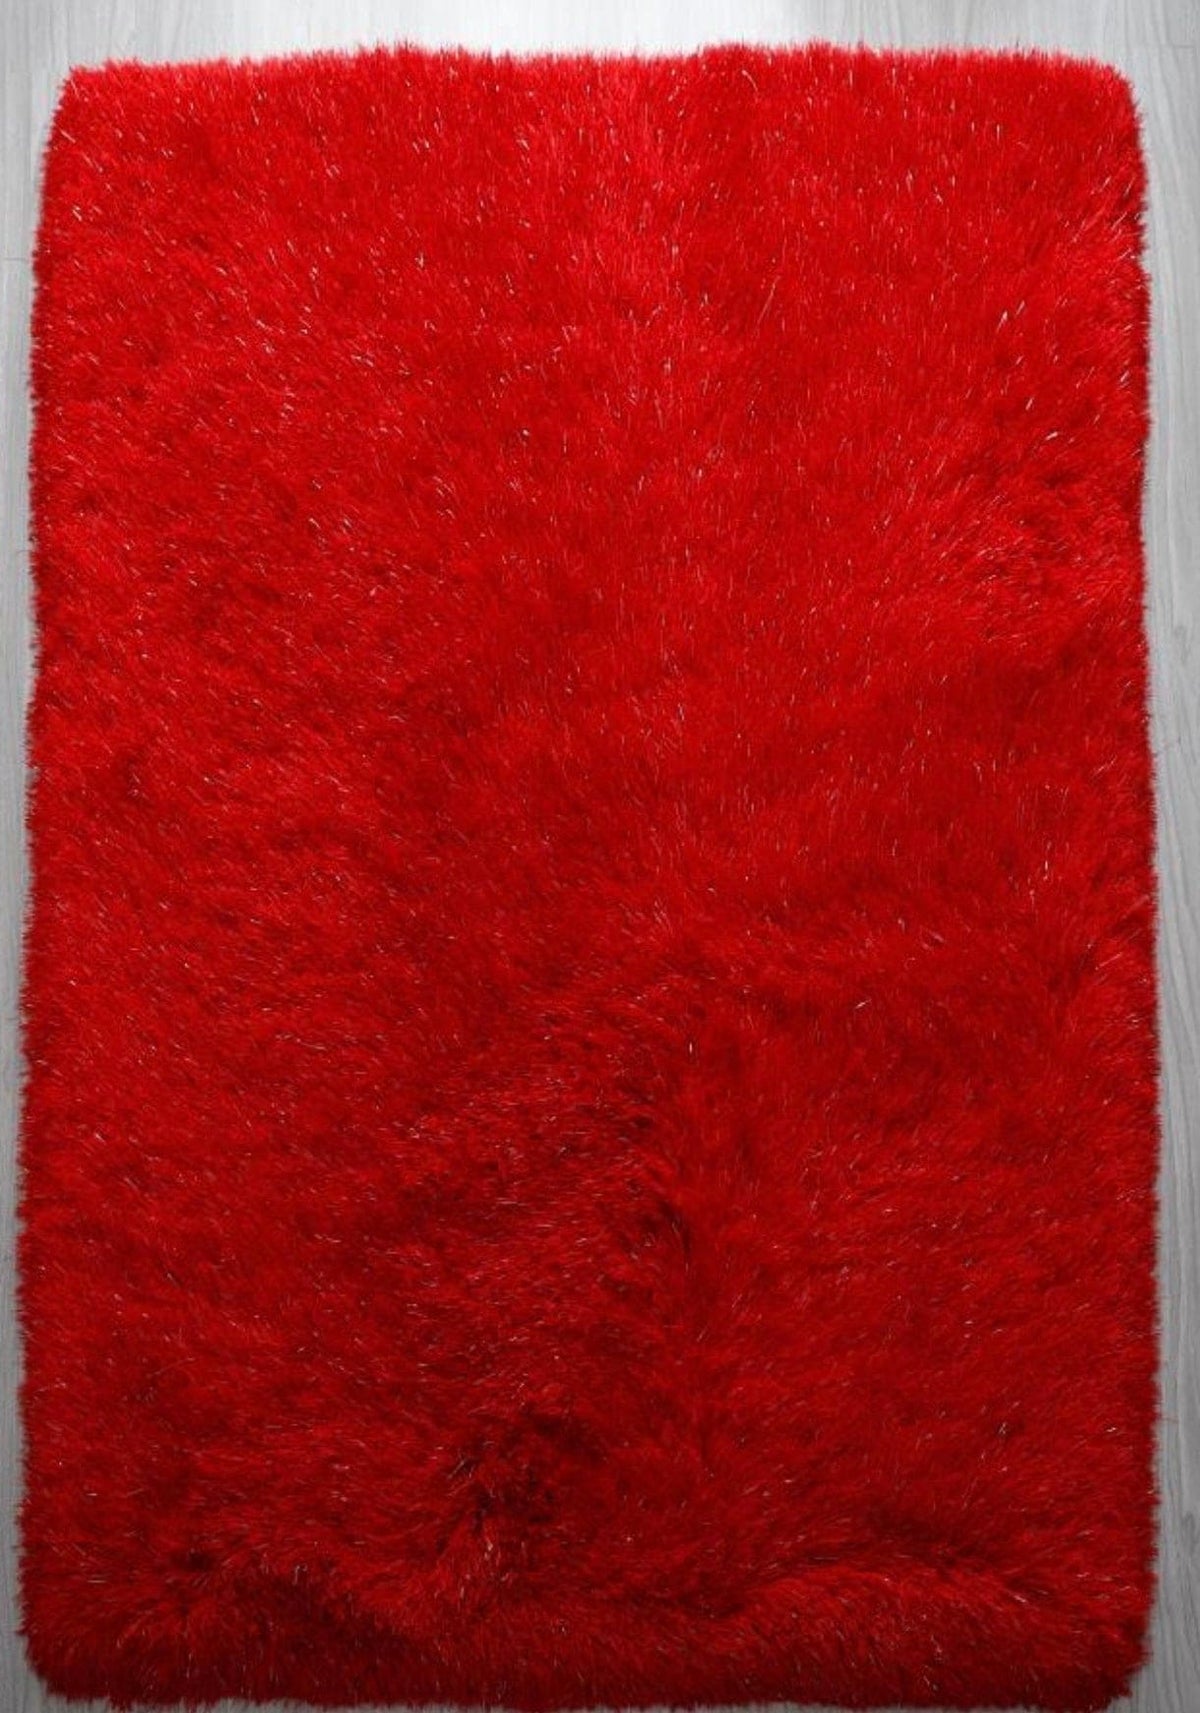 Shagy rug red and silver